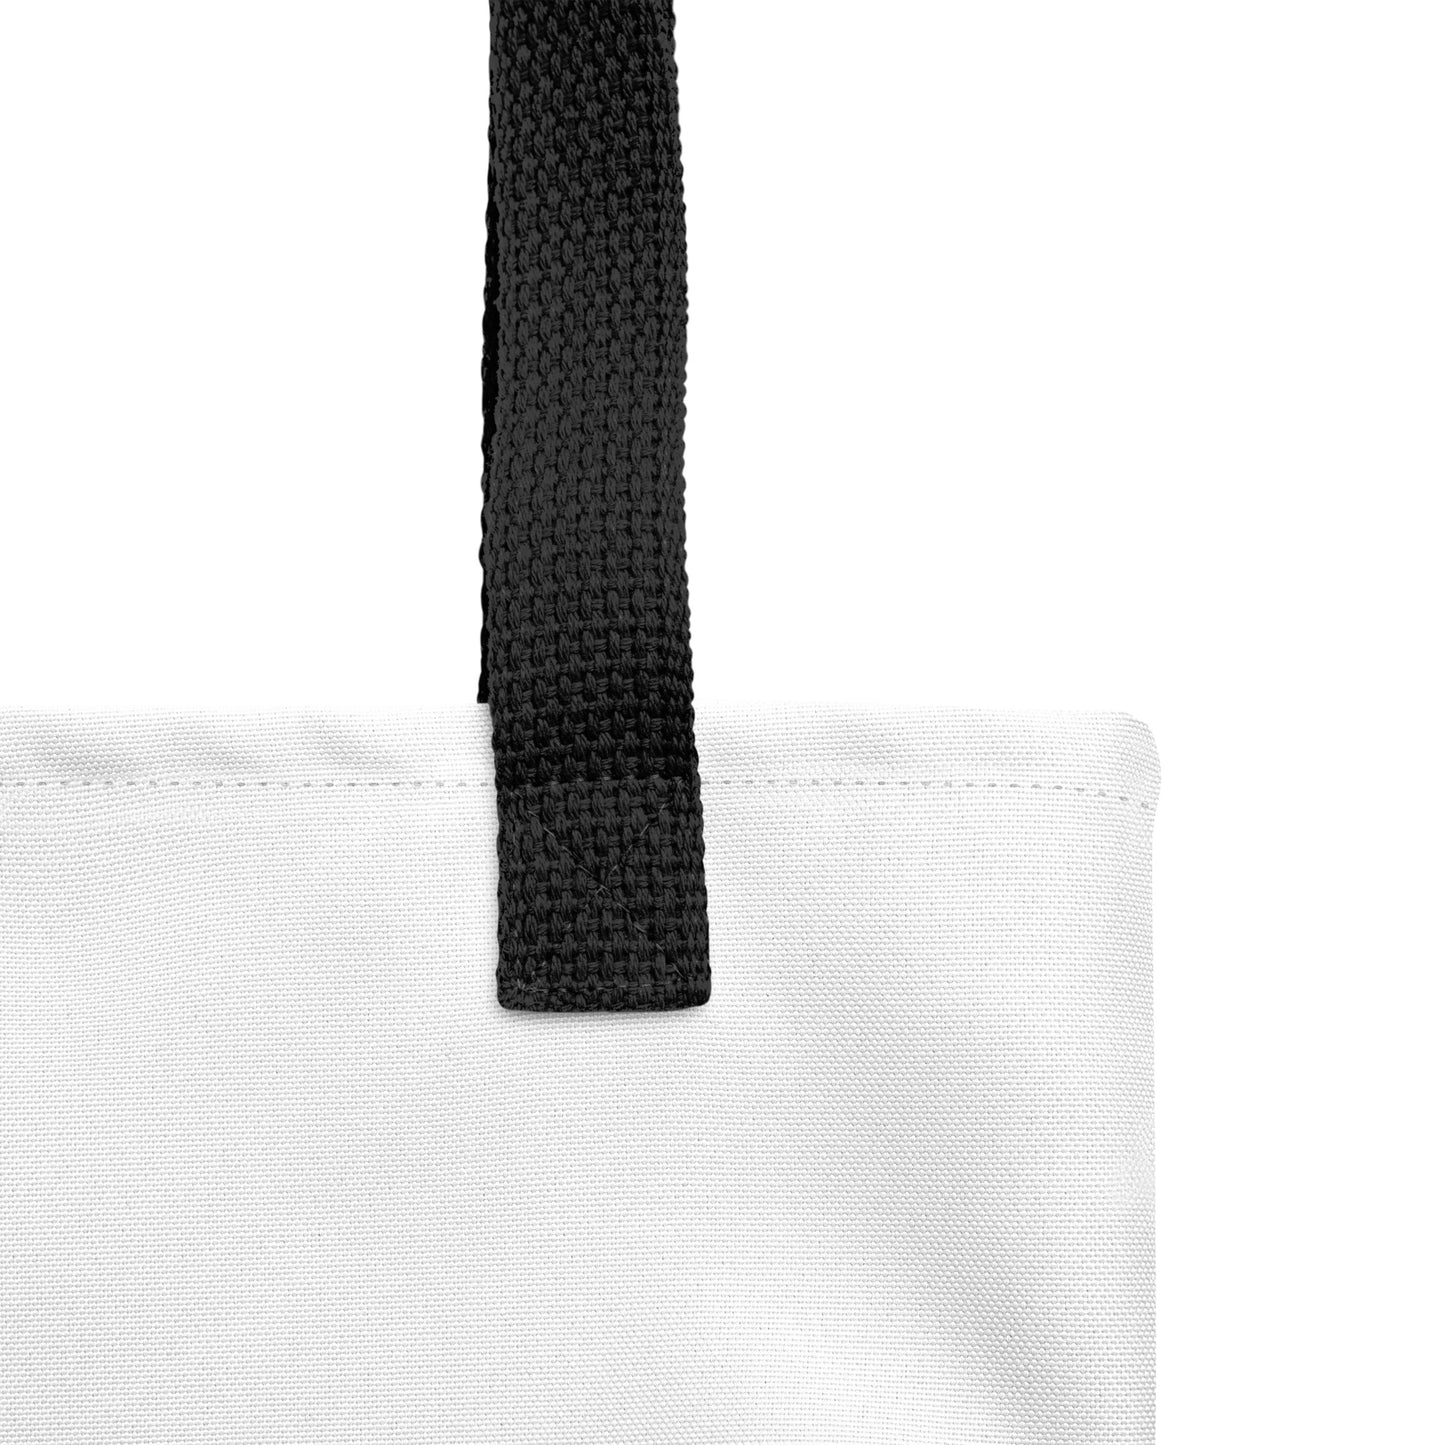 Our BoatyVerse trendy durable Tote bag